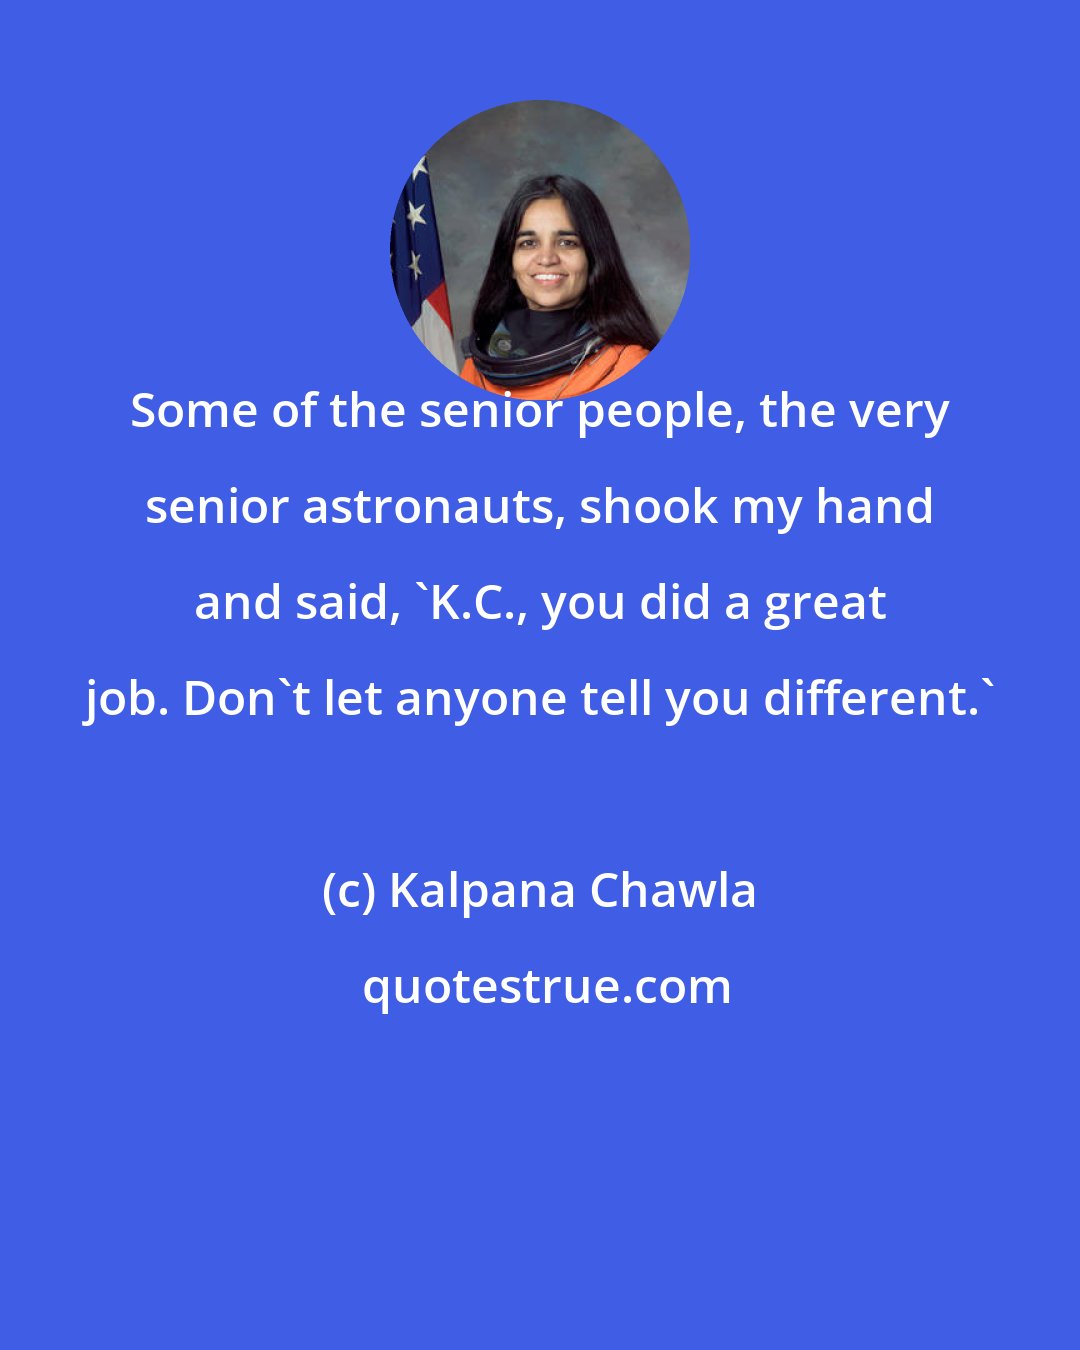 Kalpana Chawla: Some of the senior people, the very senior astronauts, shook my hand and said, 'K.C., you did a great job. Don't let anyone tell you different.'